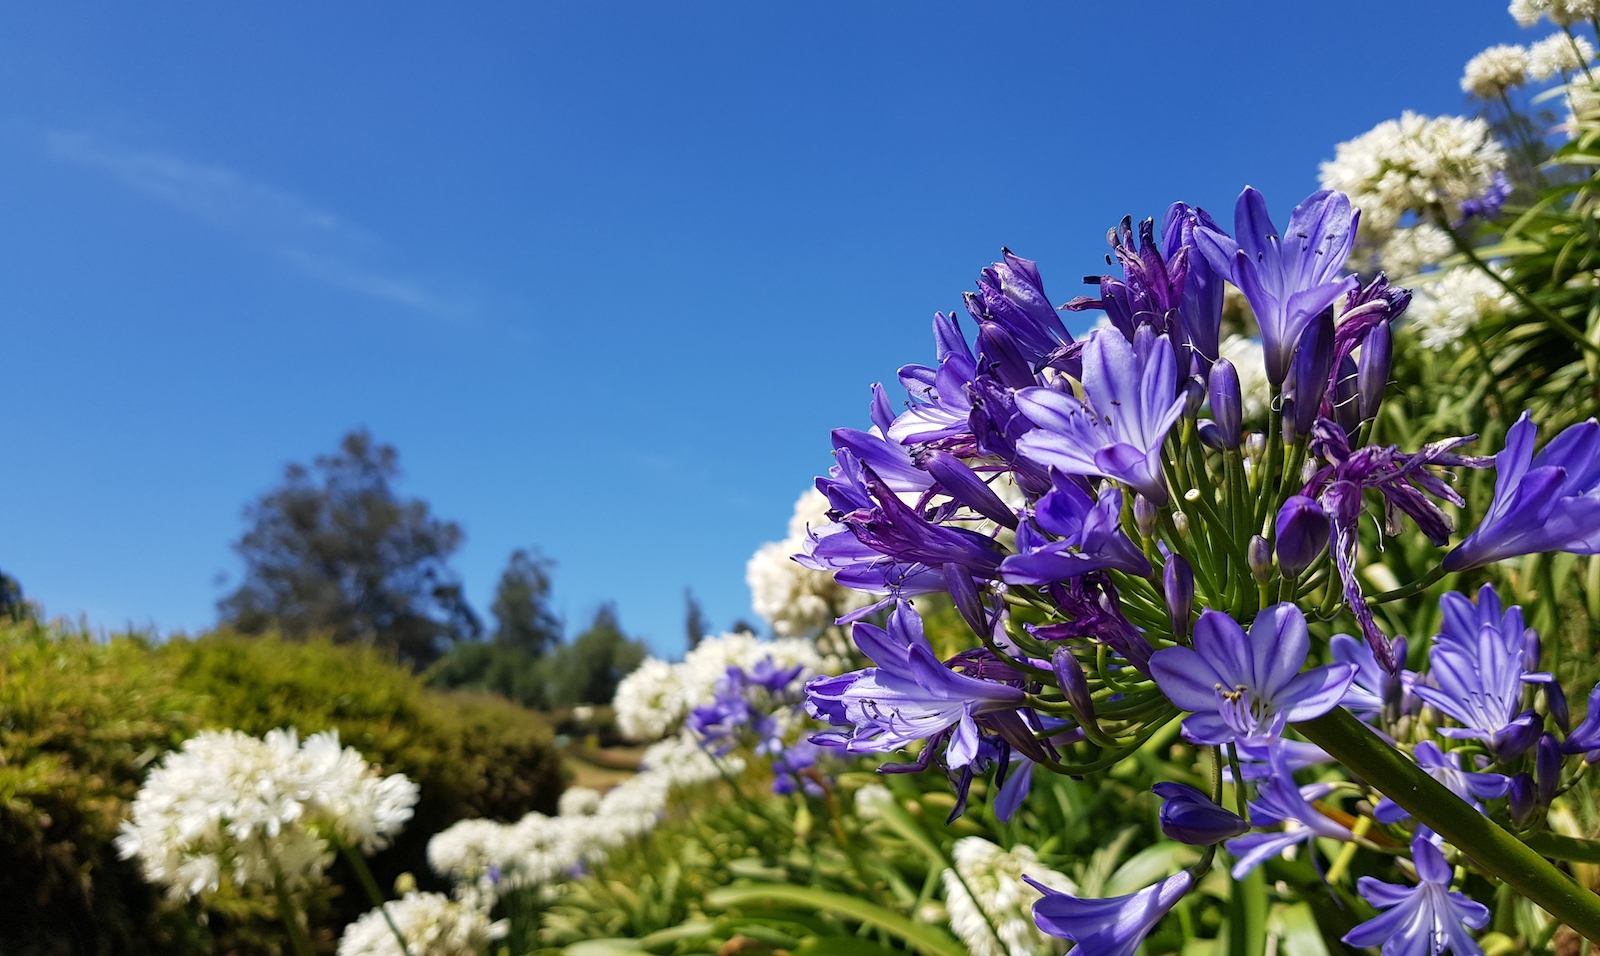 Purple flowers in the foreground with trees, shrubs, and a blue sky in the background